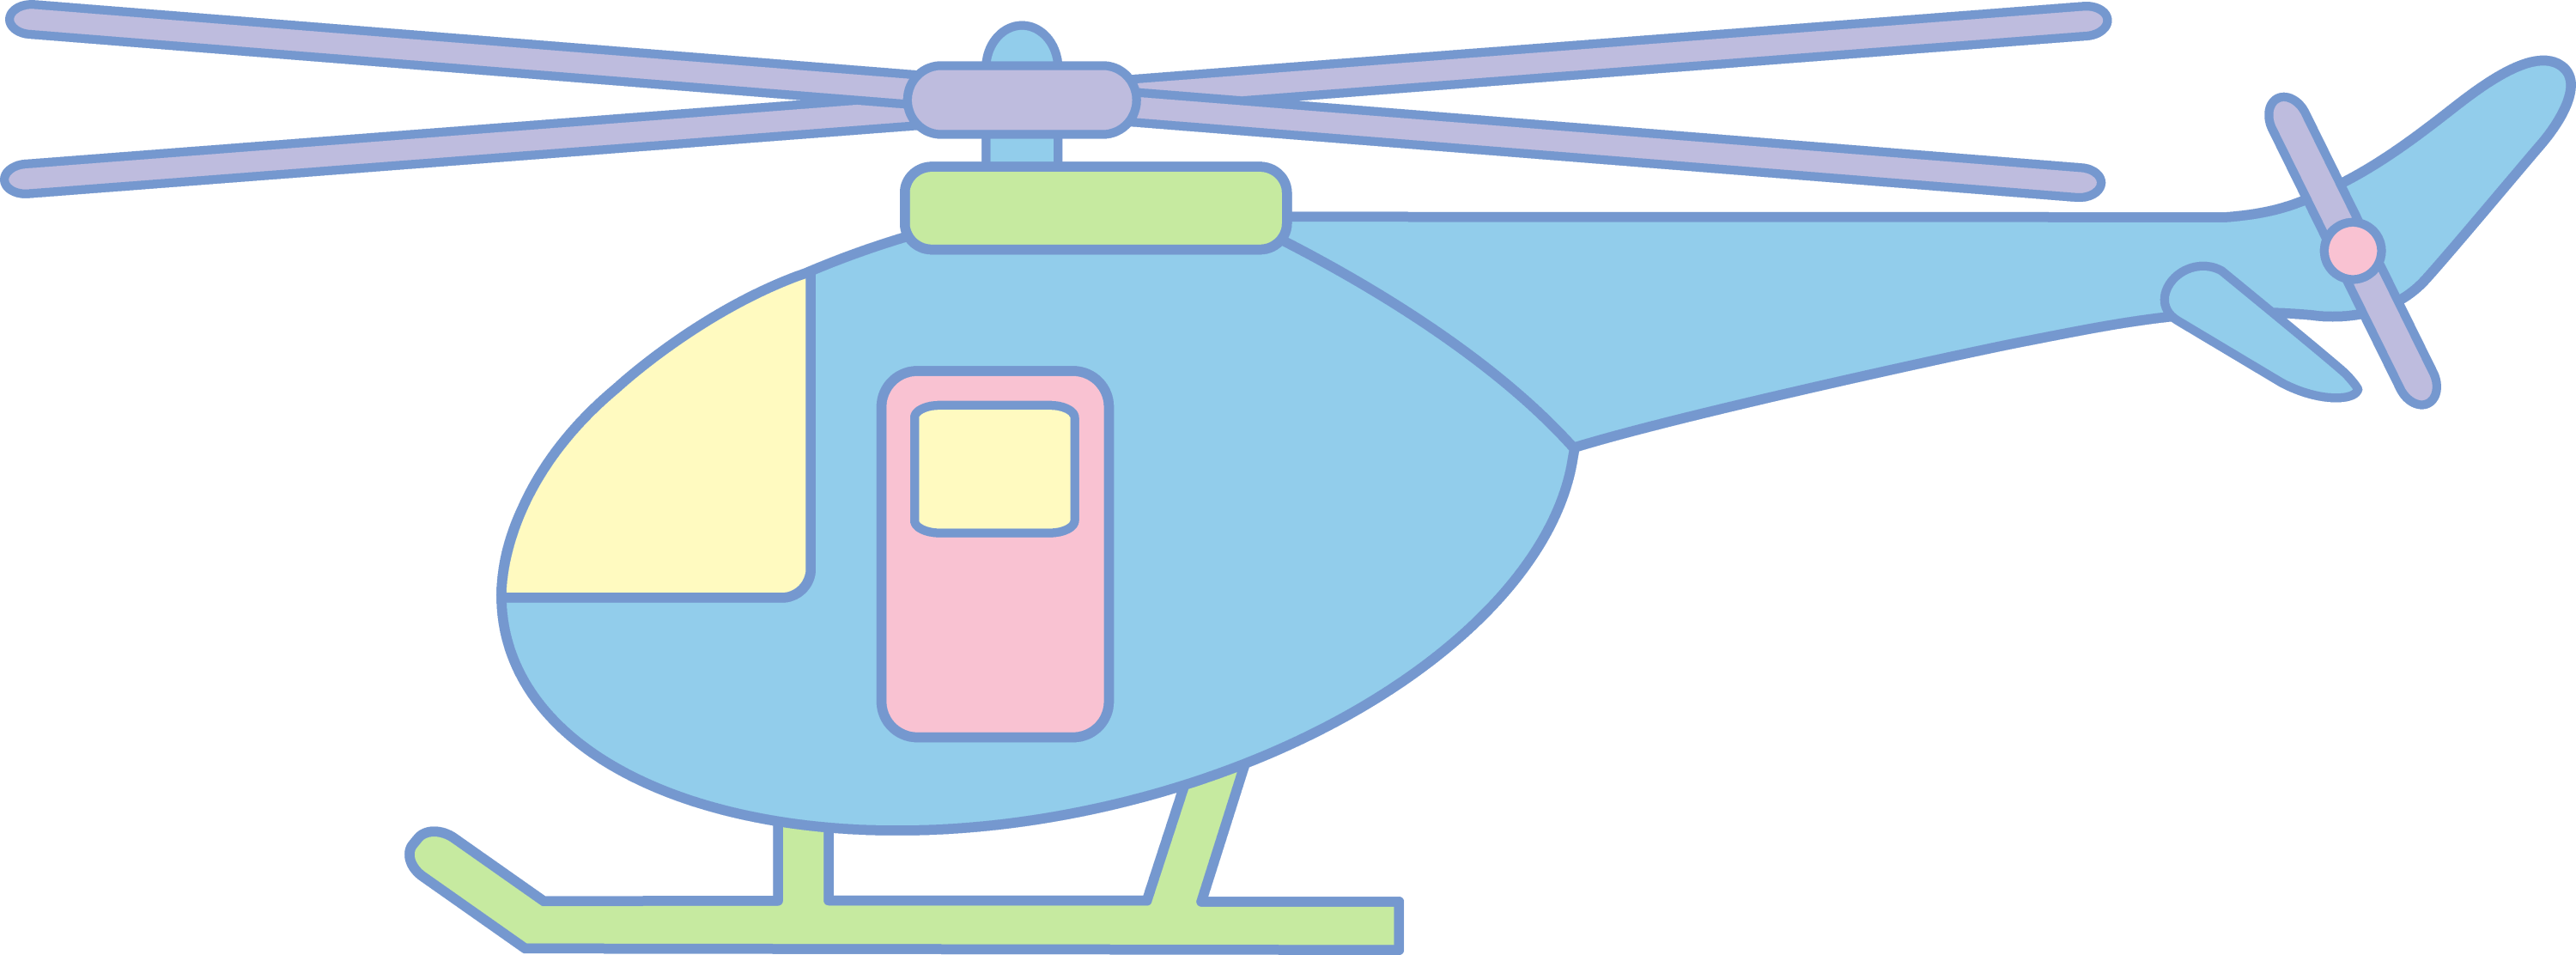 free clipart cartoon helicopter - photo #17